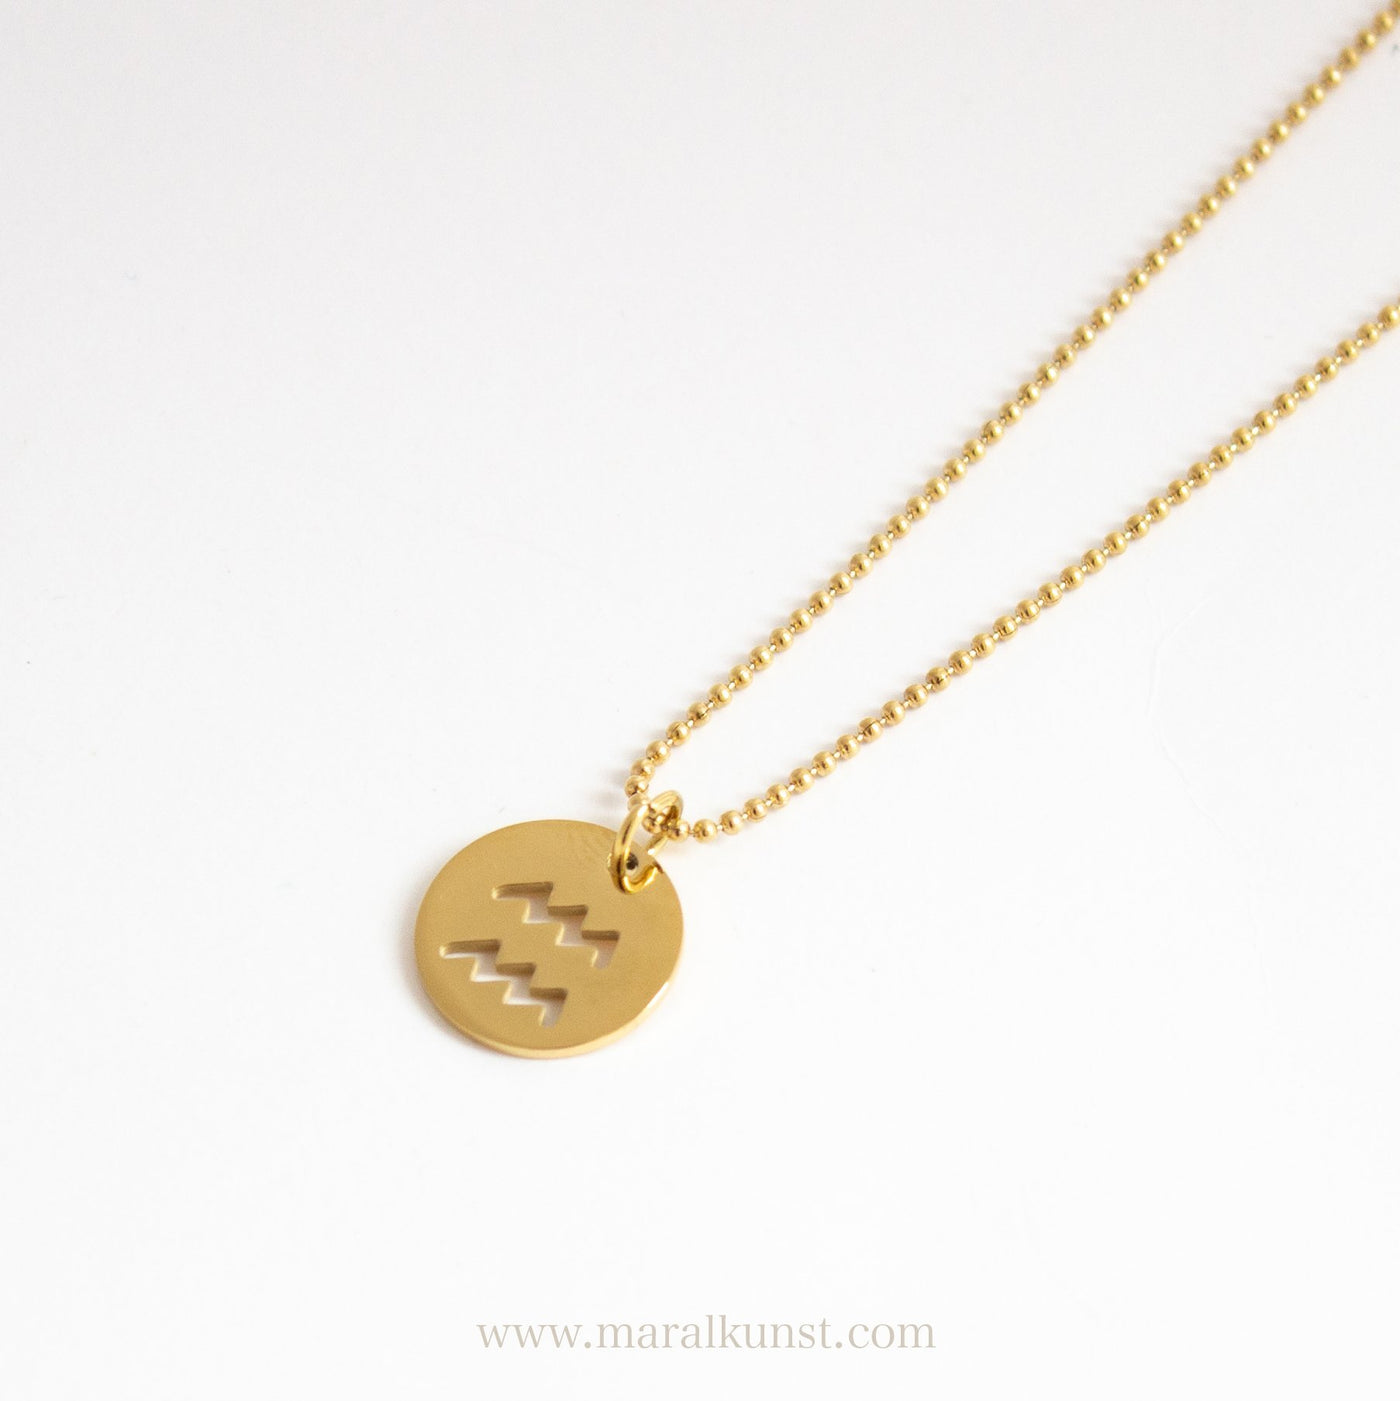 Aquarious Zodiac Sign Necklace - Maral Kunst Jewelry